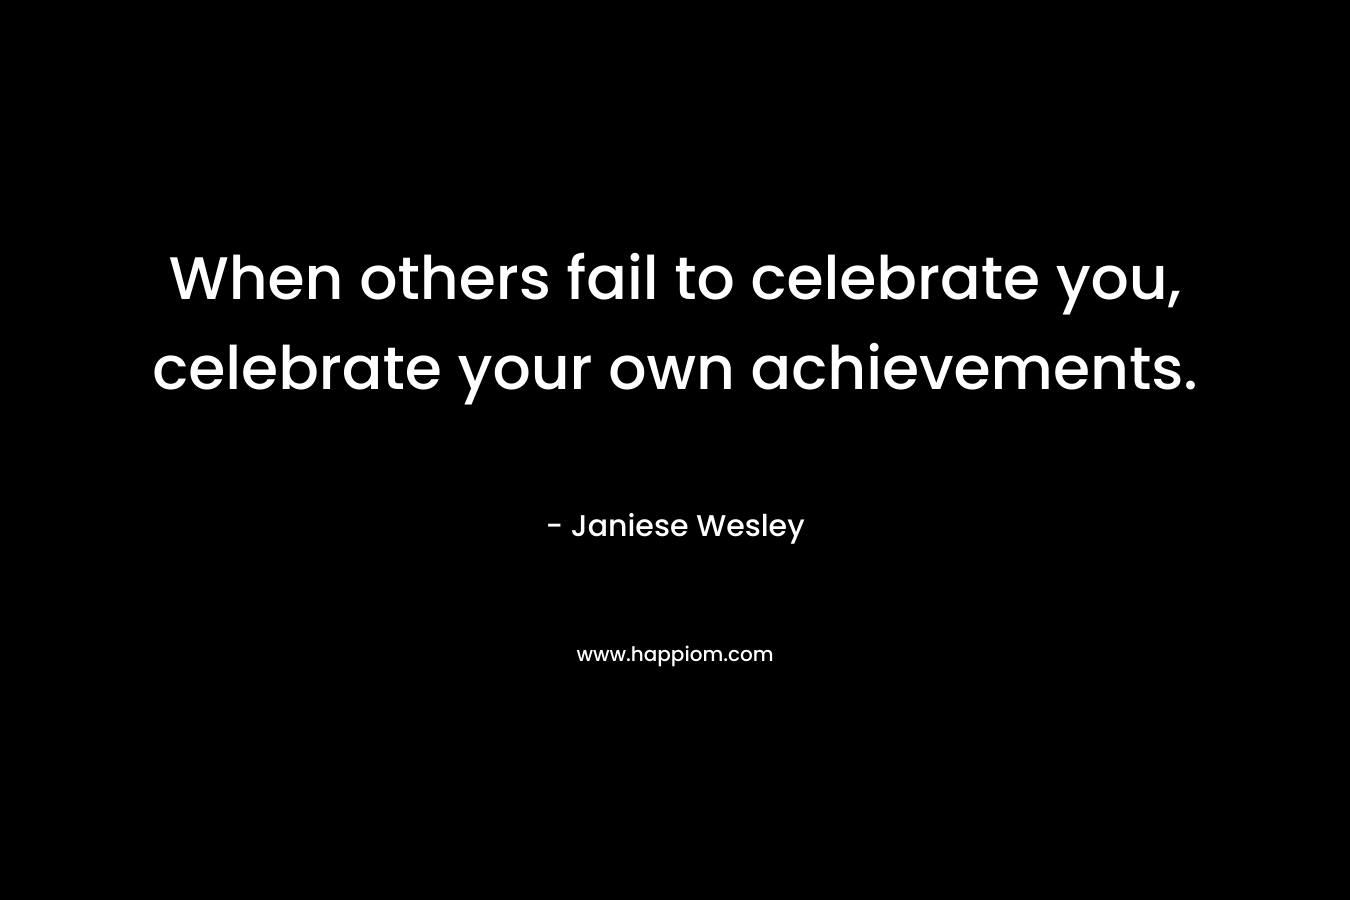 When others fail to celebrate you, celebrate your own achievements.